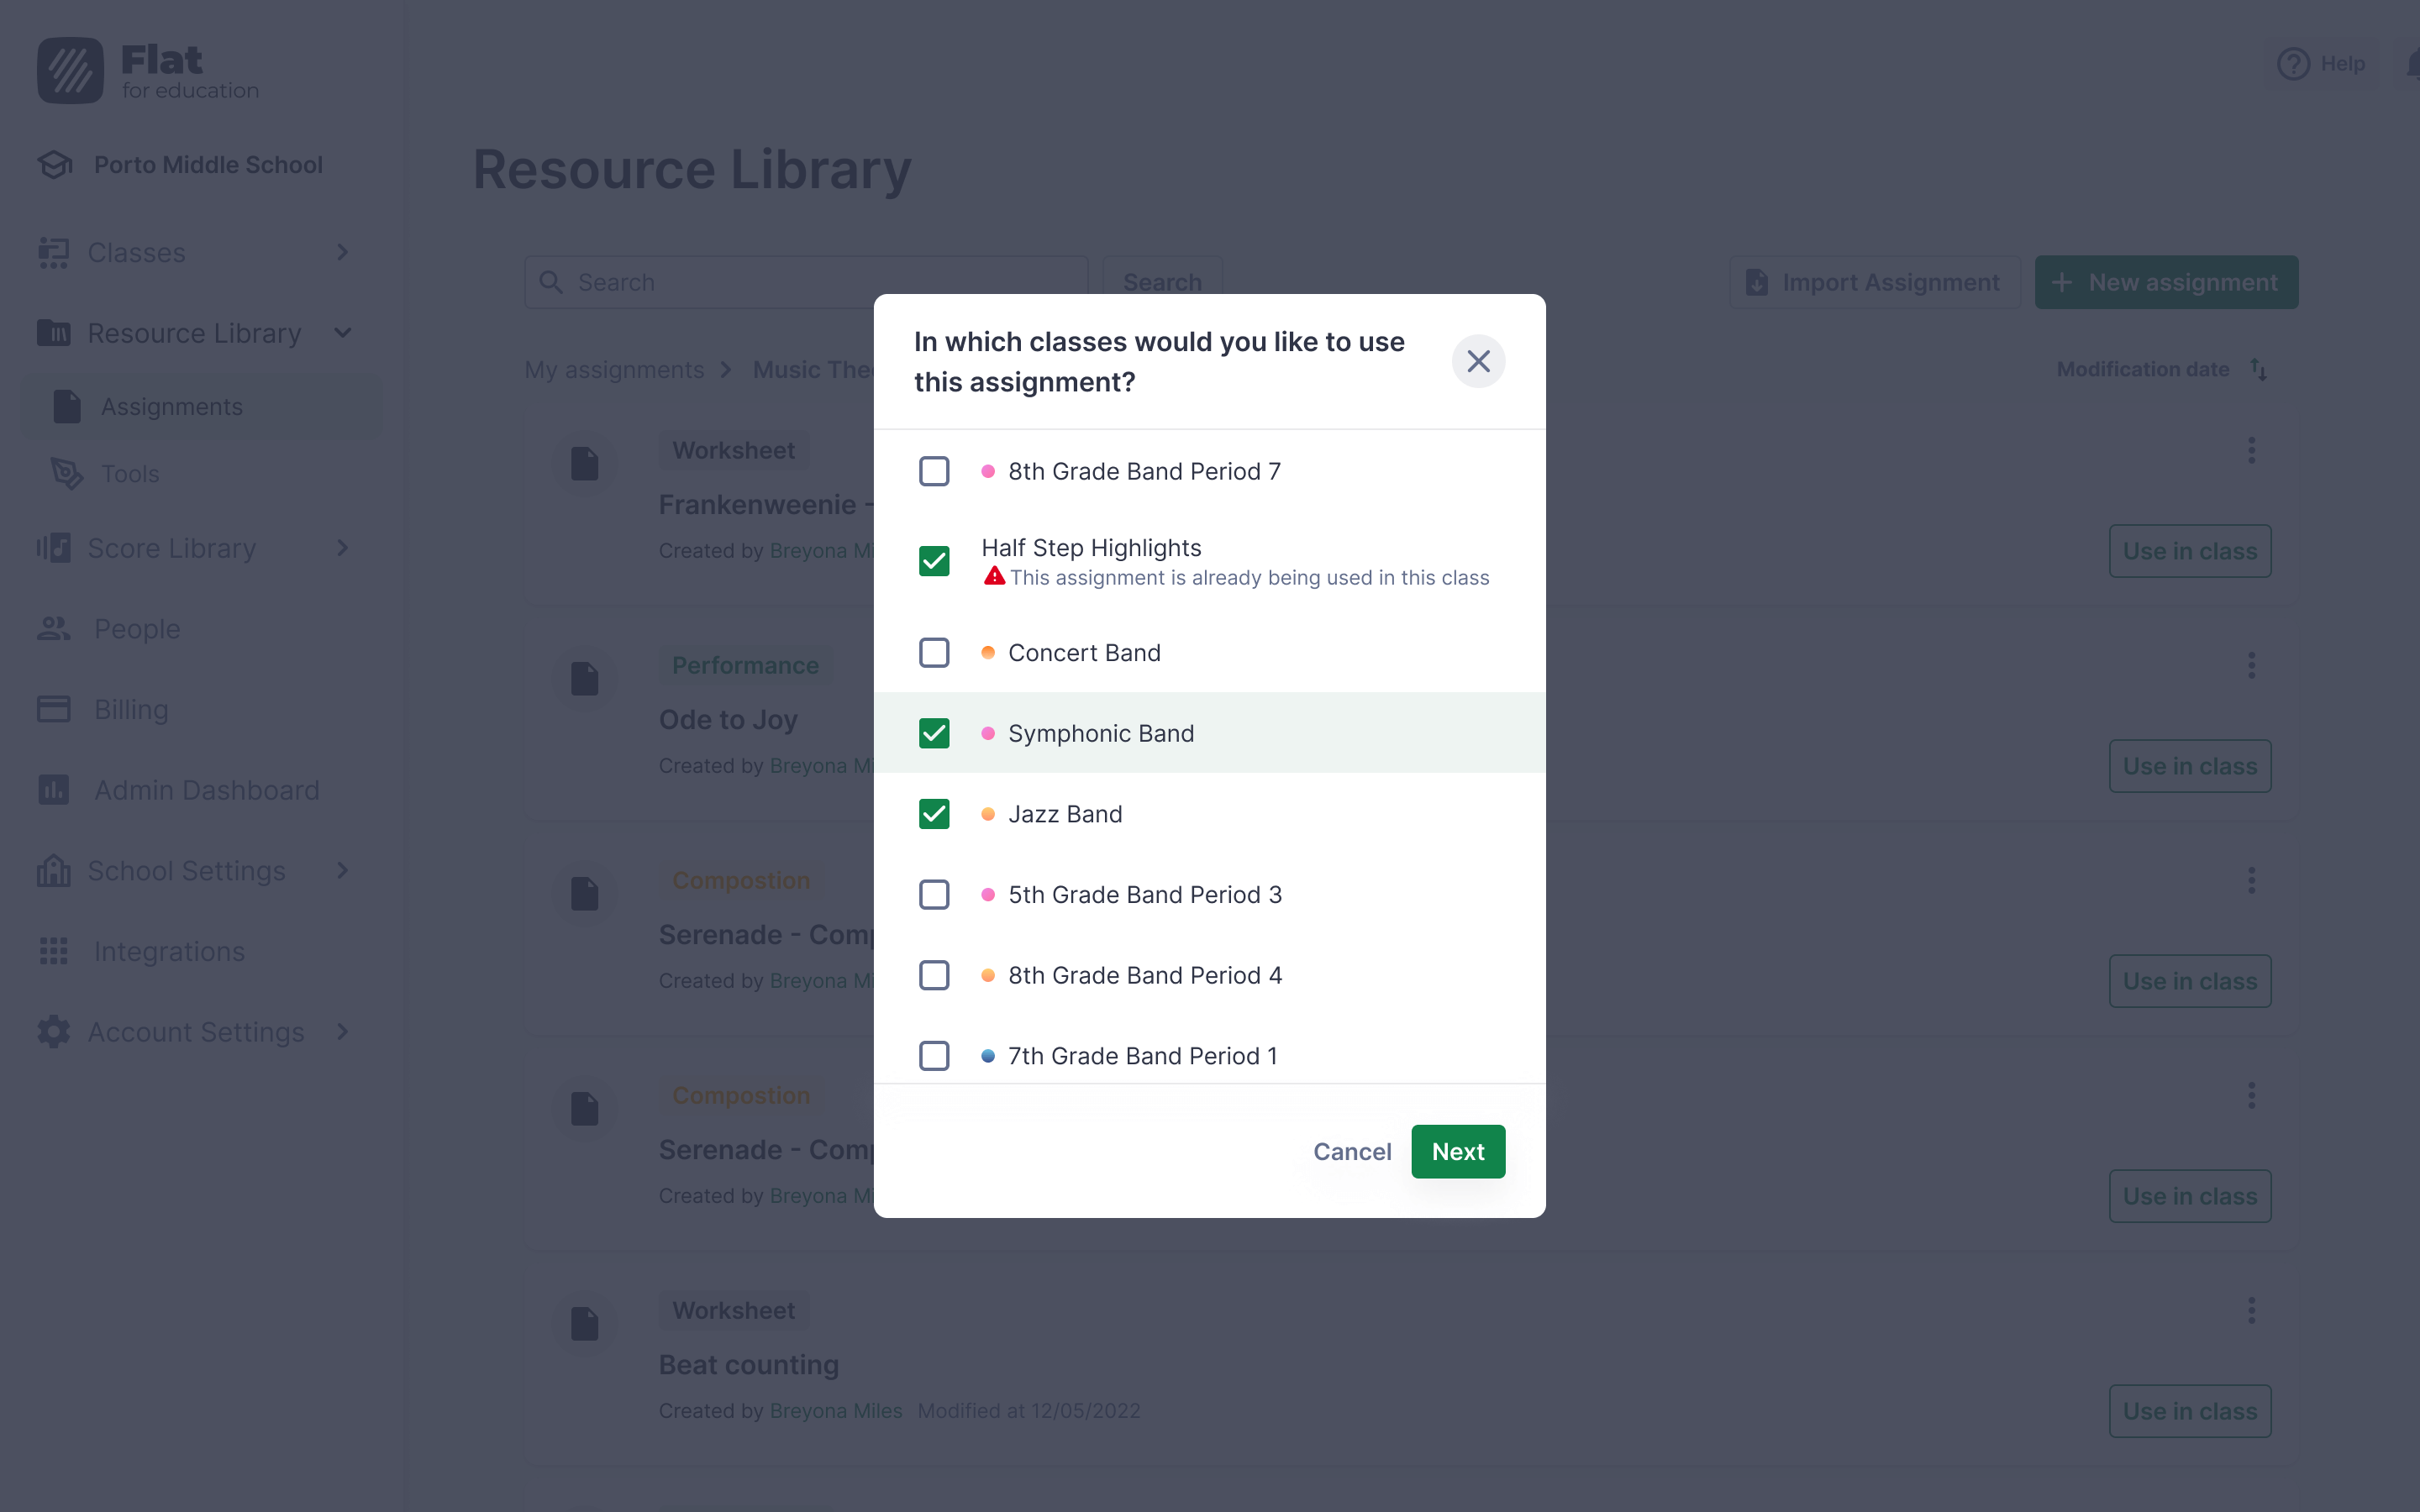 Publish assignments to multiple classes